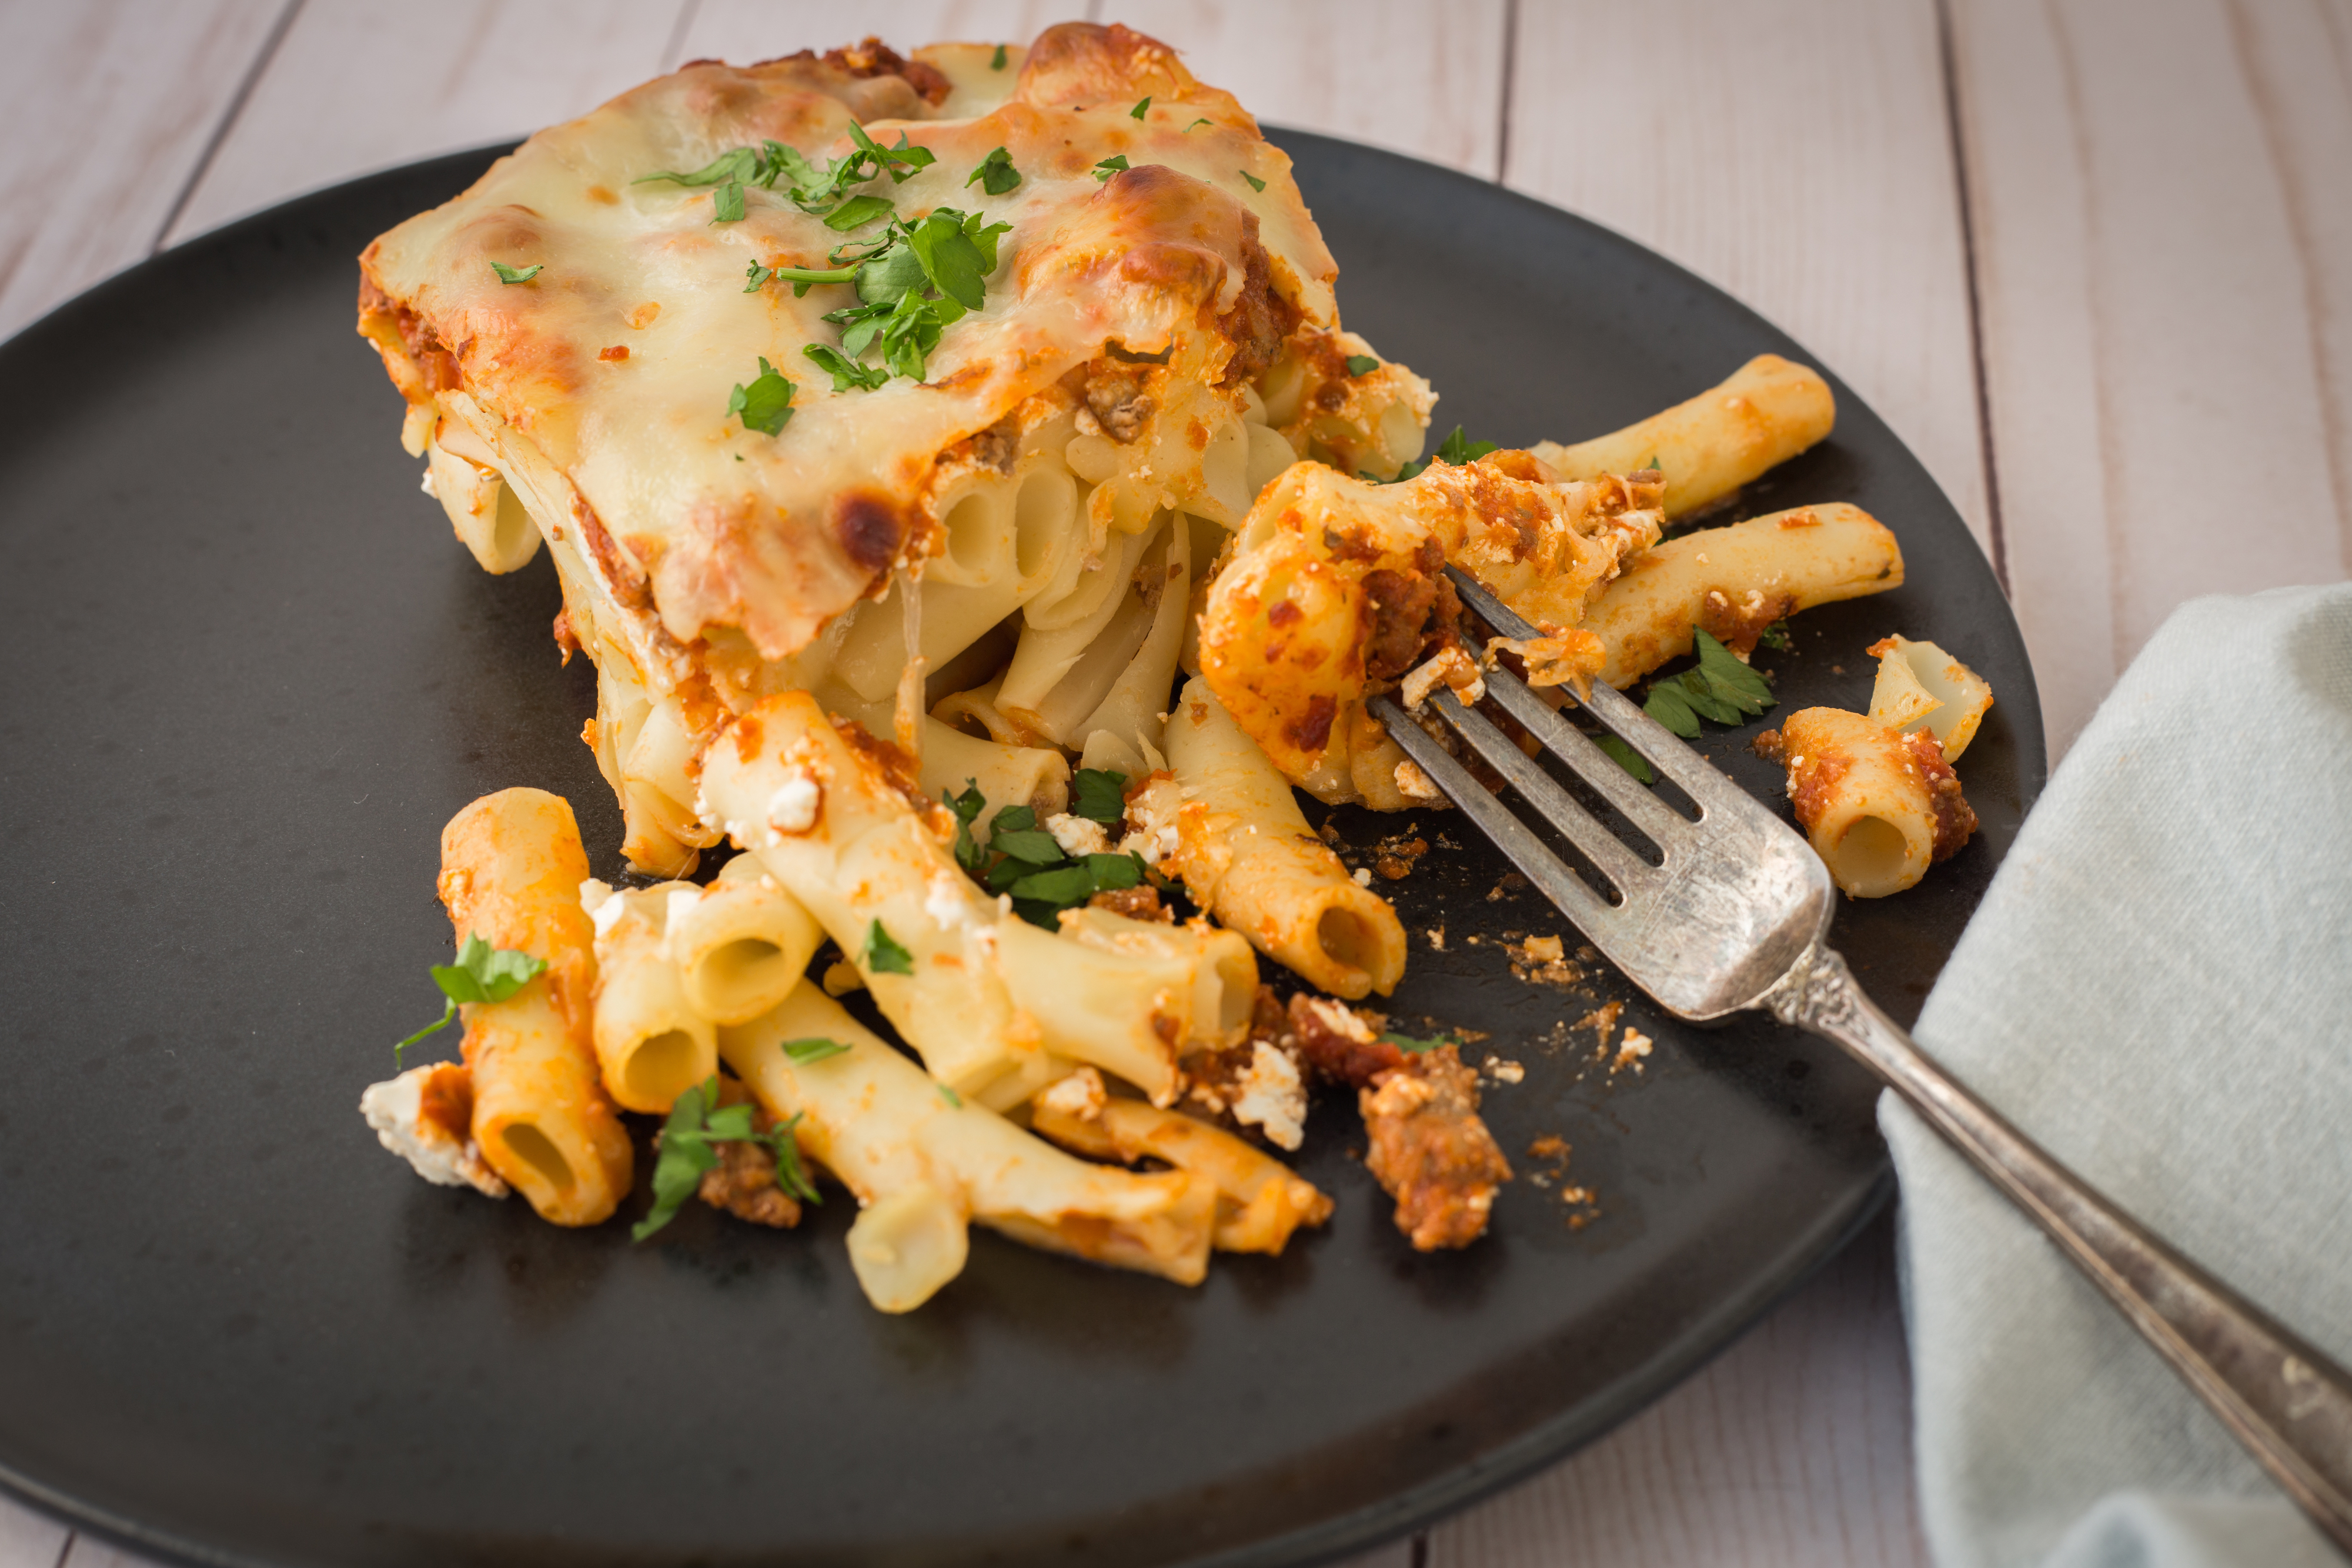 Plate with lasagna and pasta with garnish next to fork on a table